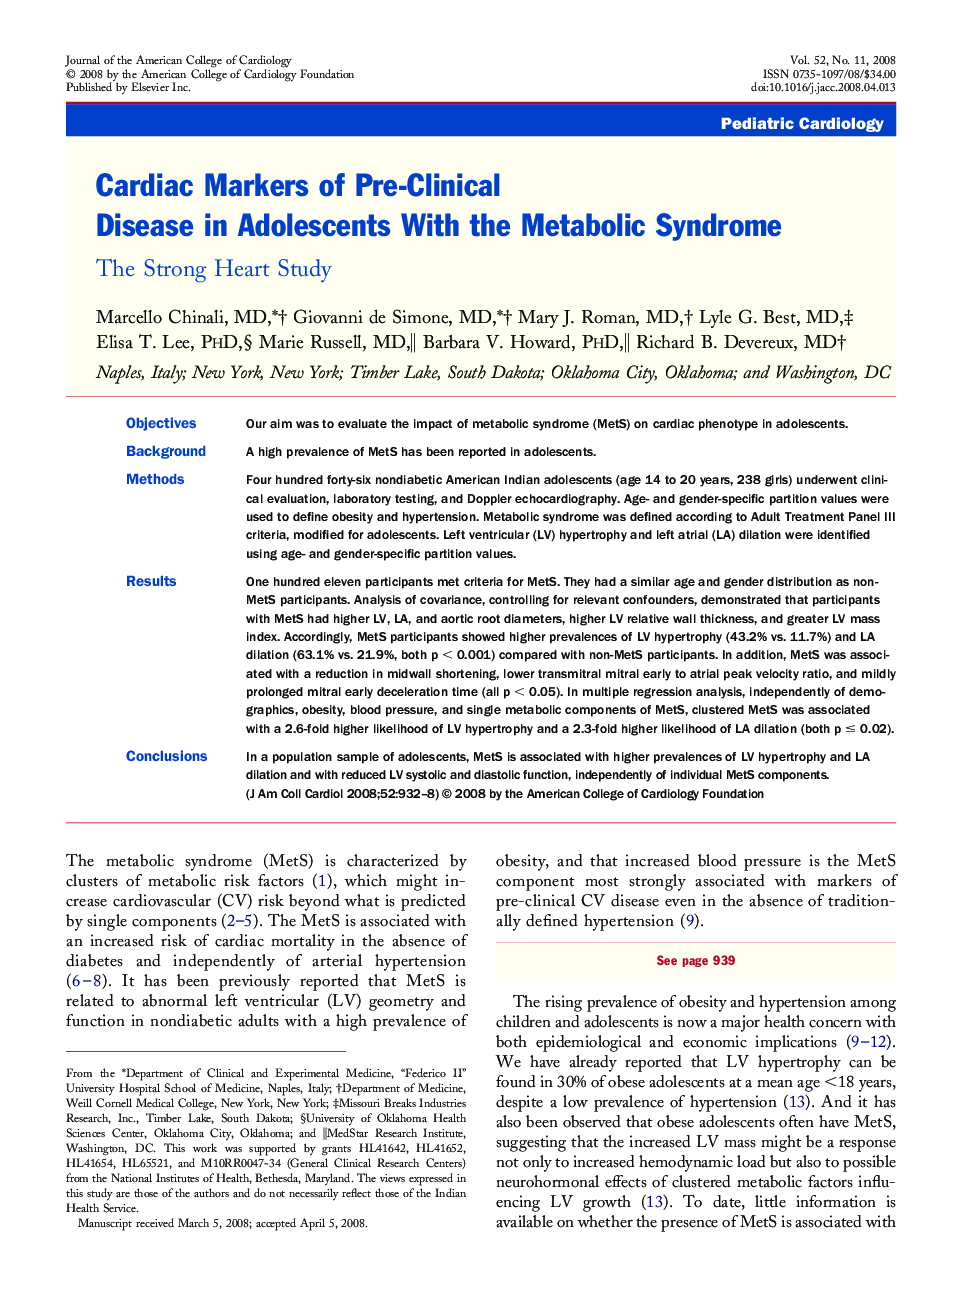 Cardiac Markers of Pre-Clinical Disease in Adolescents With the Metabolic Syndrome : The Strong Heart Study